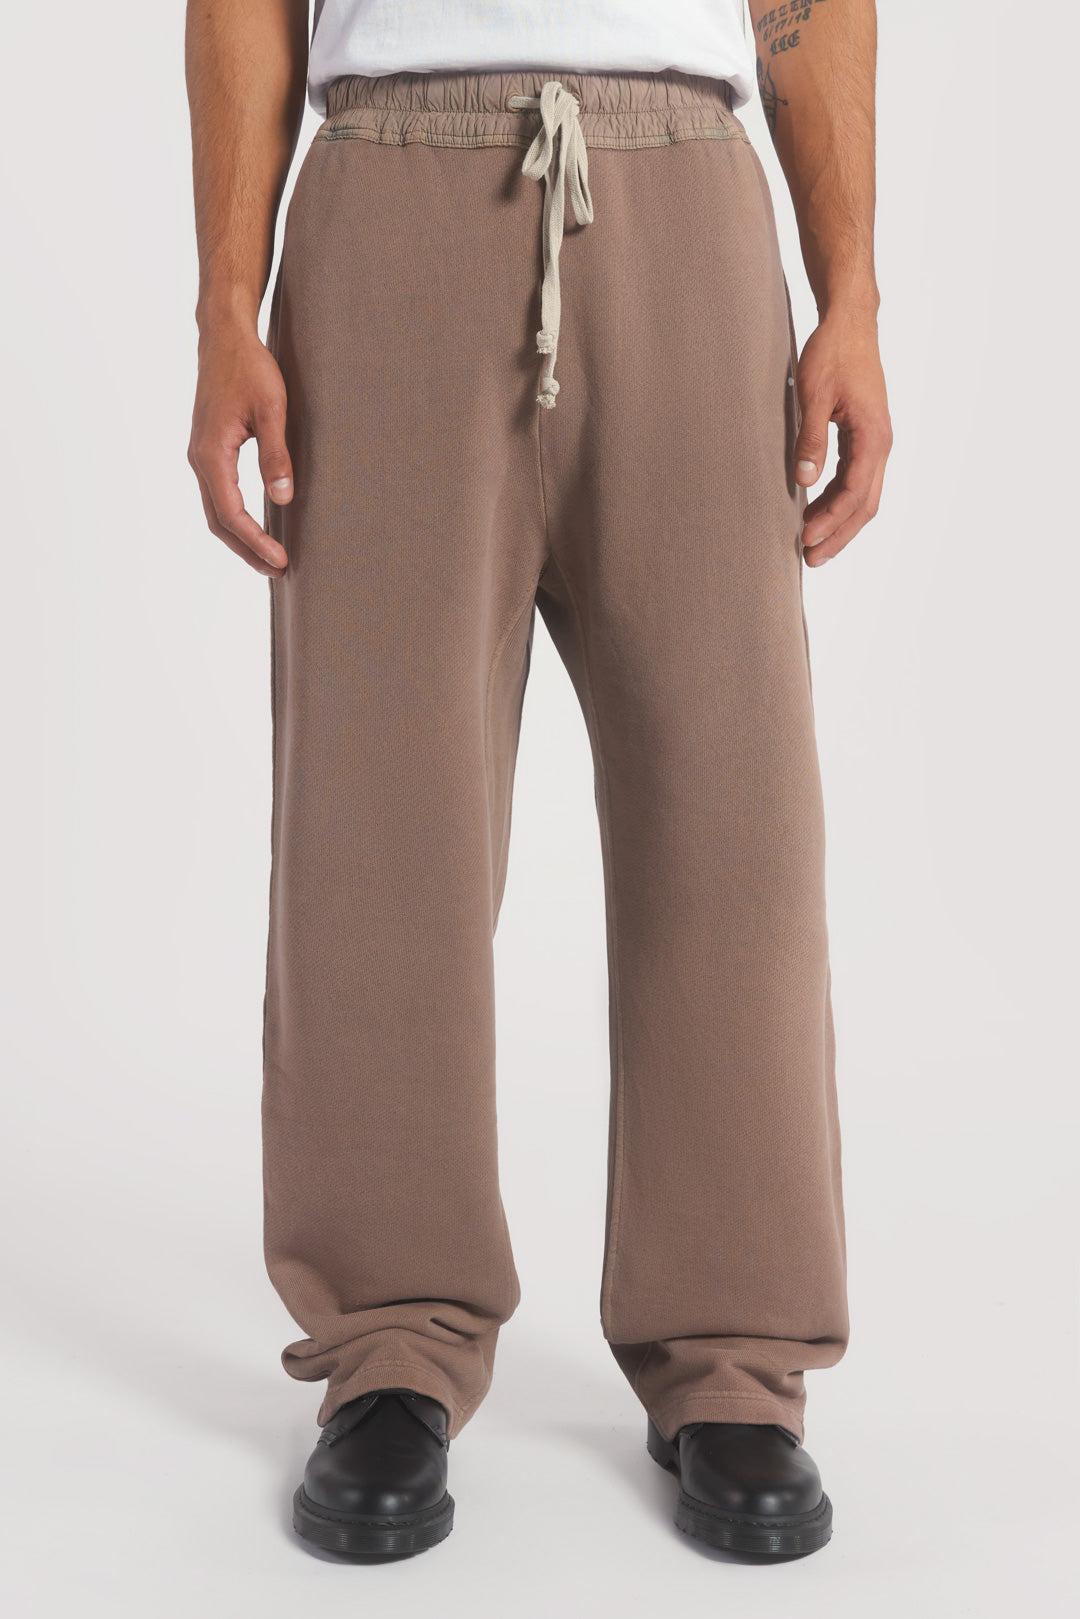 Jaded London NTRLS Clay Relaxed Joggers